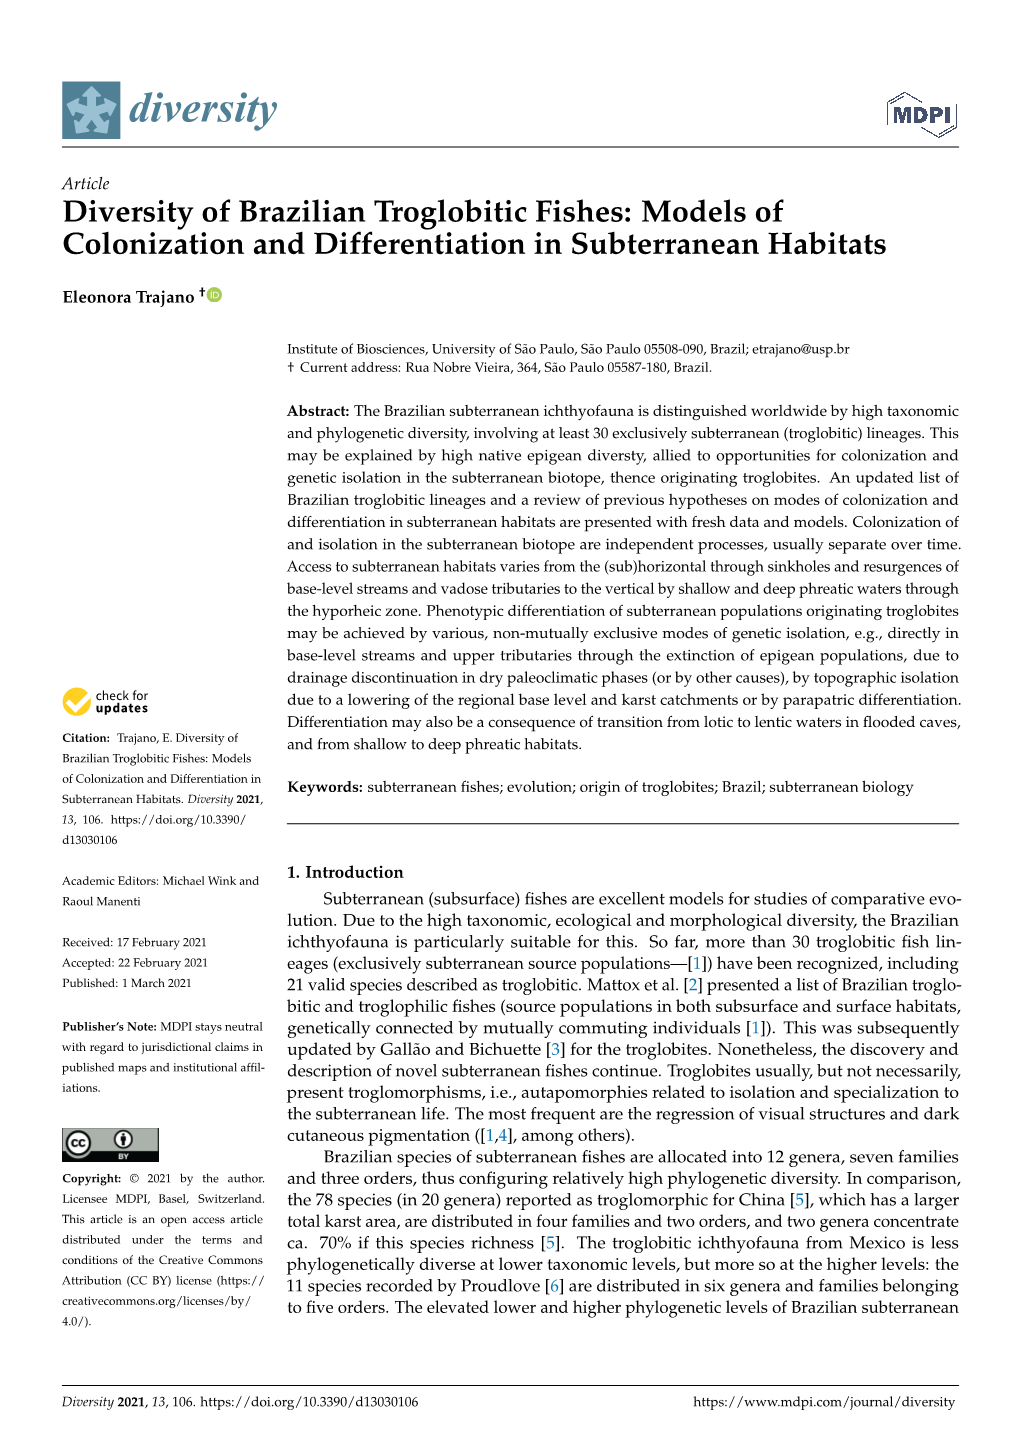 Diversity of Brazilian Troglobitic Fishes: Models of Colonization and Differentiation in Subterranean Habitats